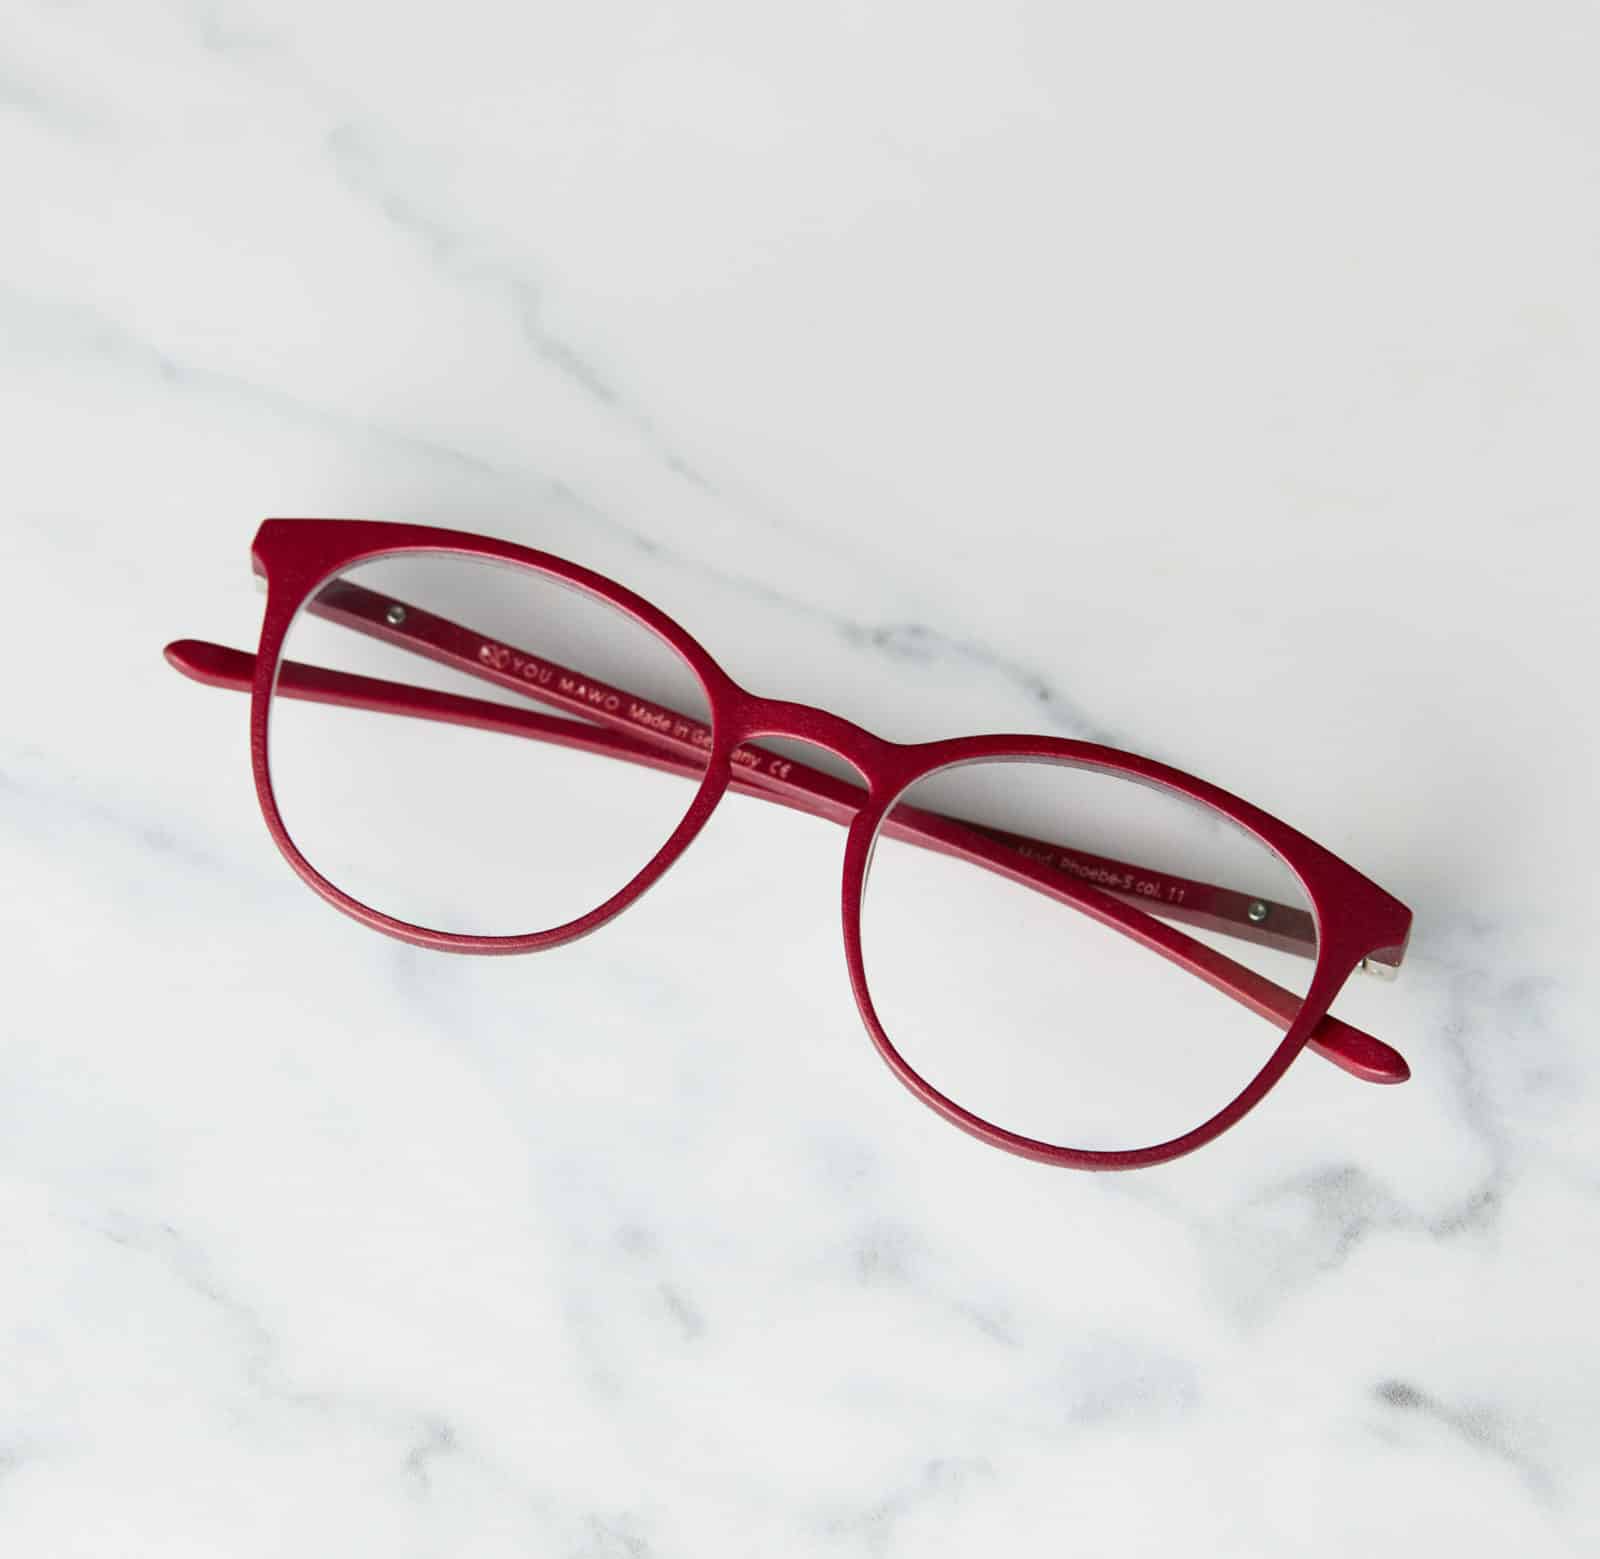 Petite eyeglasses for small faces